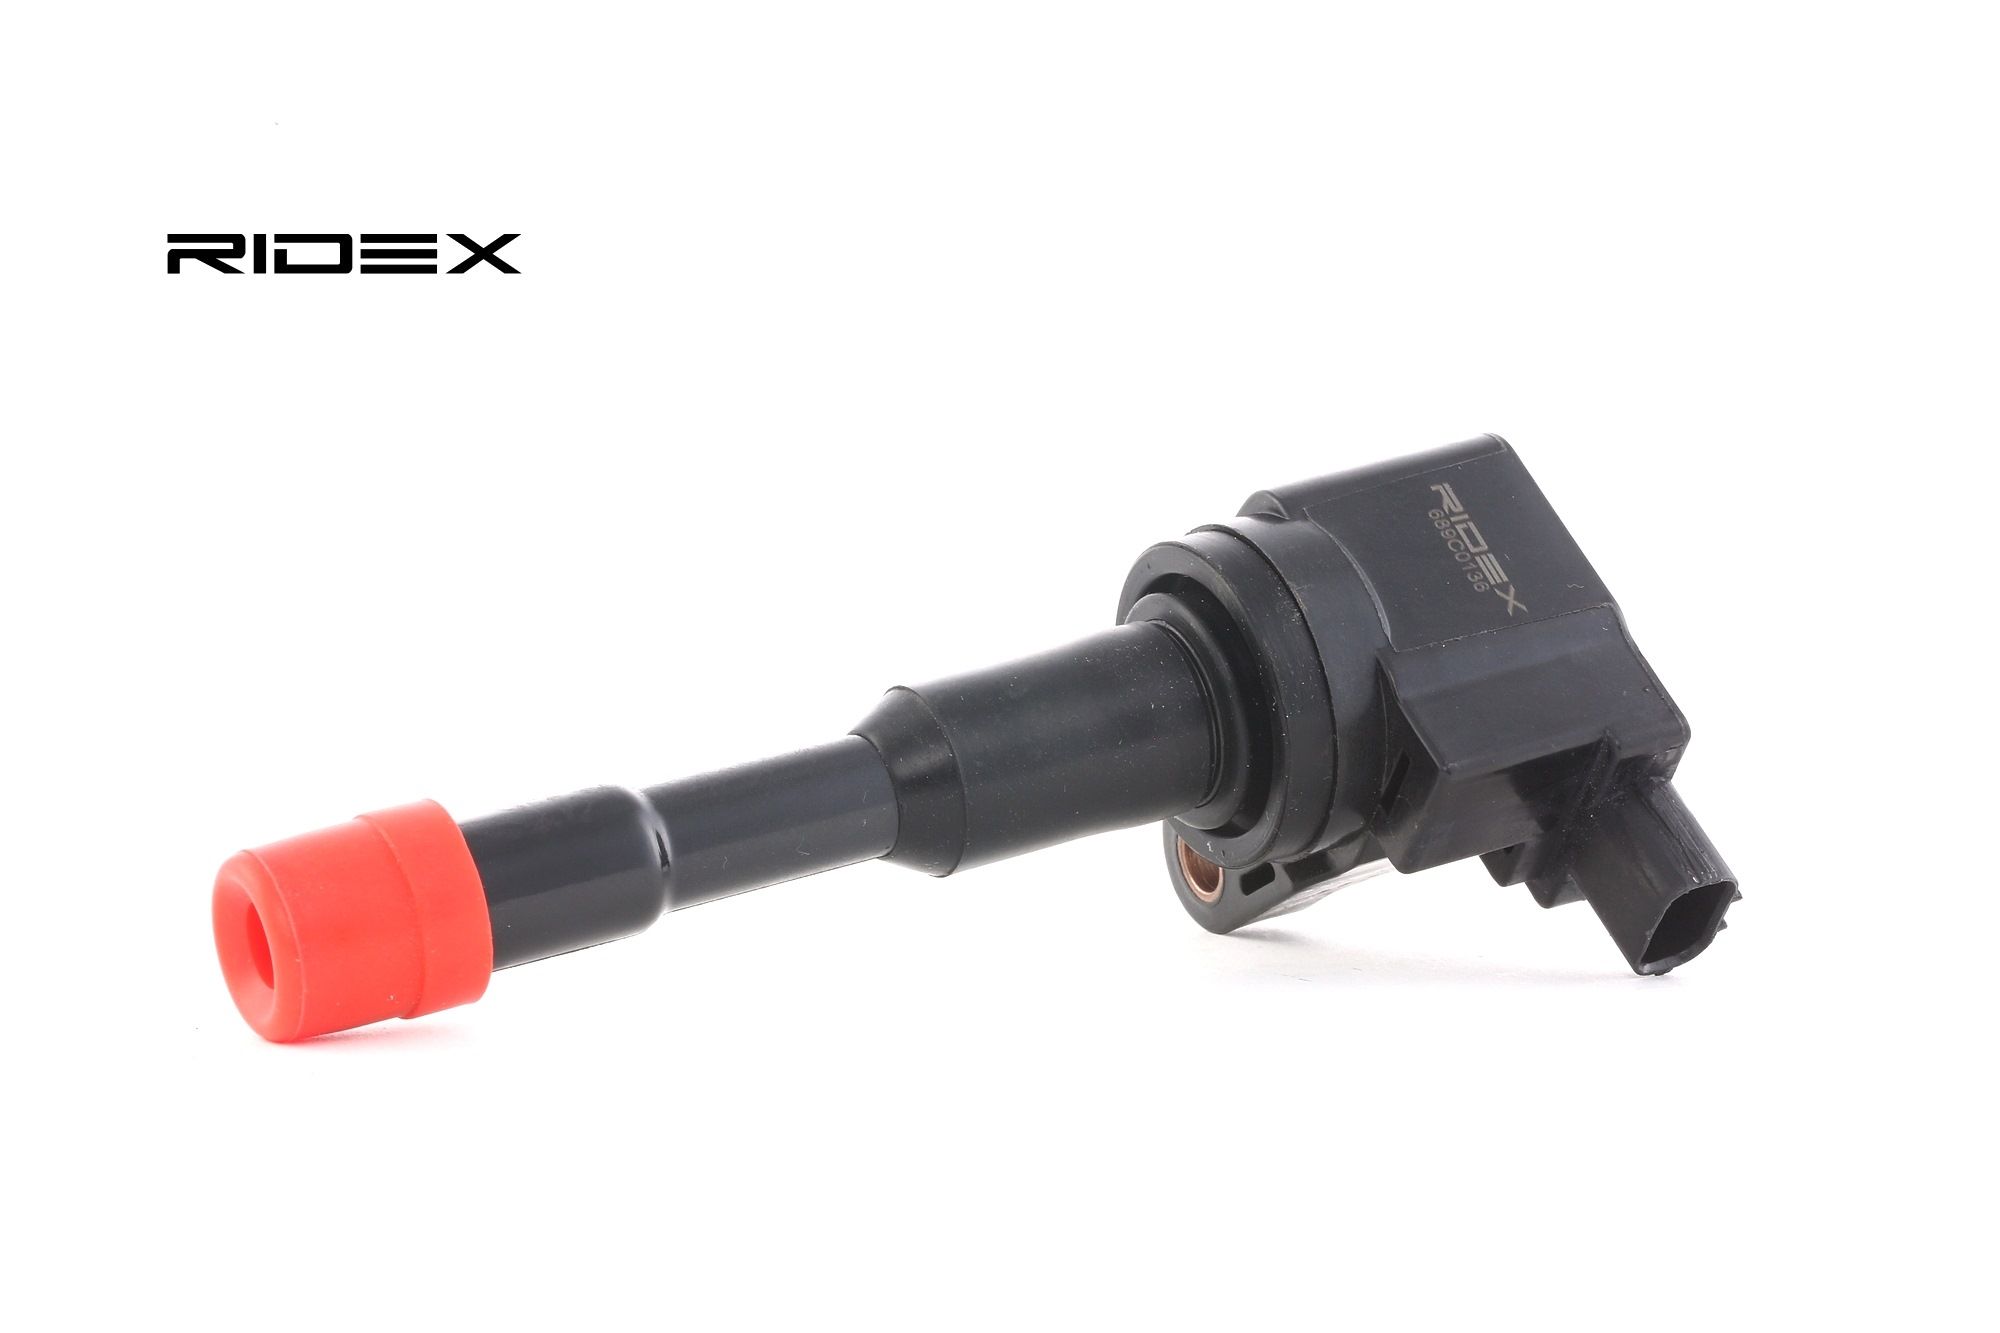 RIDEX 689C0136 Ignition coil 3-pin connector, Flush-Fitting Pencil Ignition Coils, Исполнение разъема SAE, incl. spark plug connector